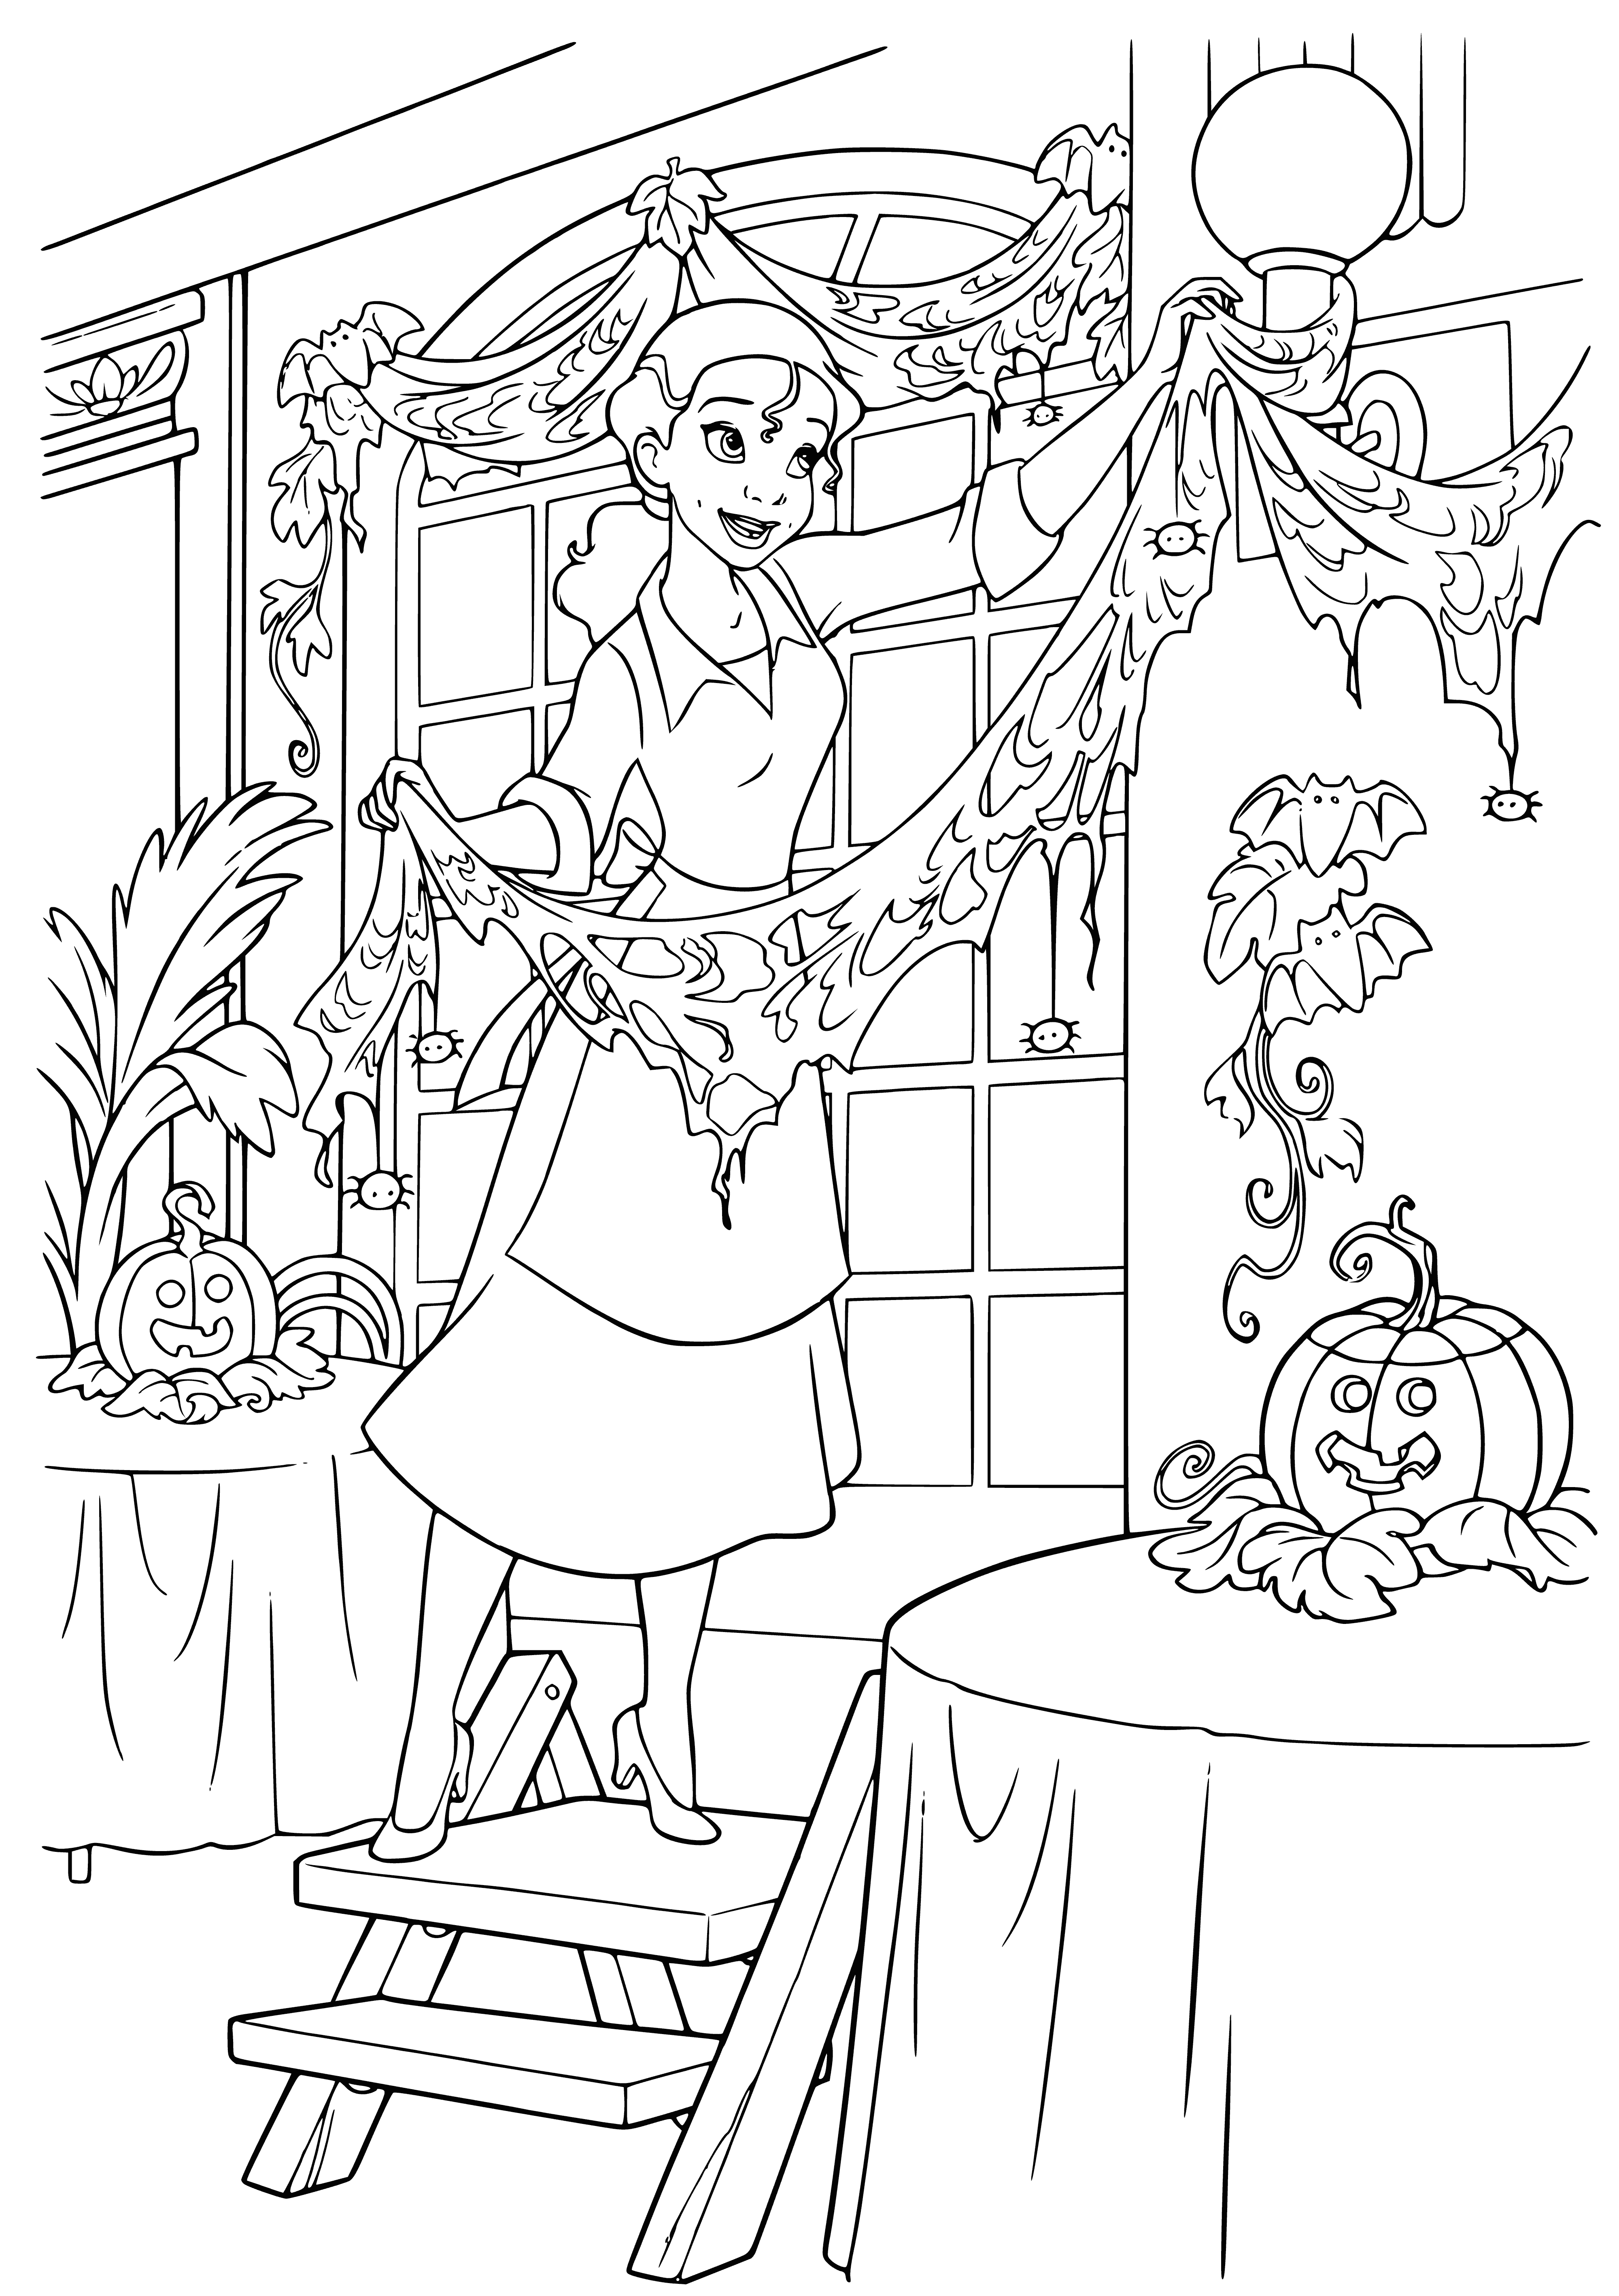 coloring page: Diana gets ready for Halloween in her bedroom with cat ears, decorations and a striped pumpkin.